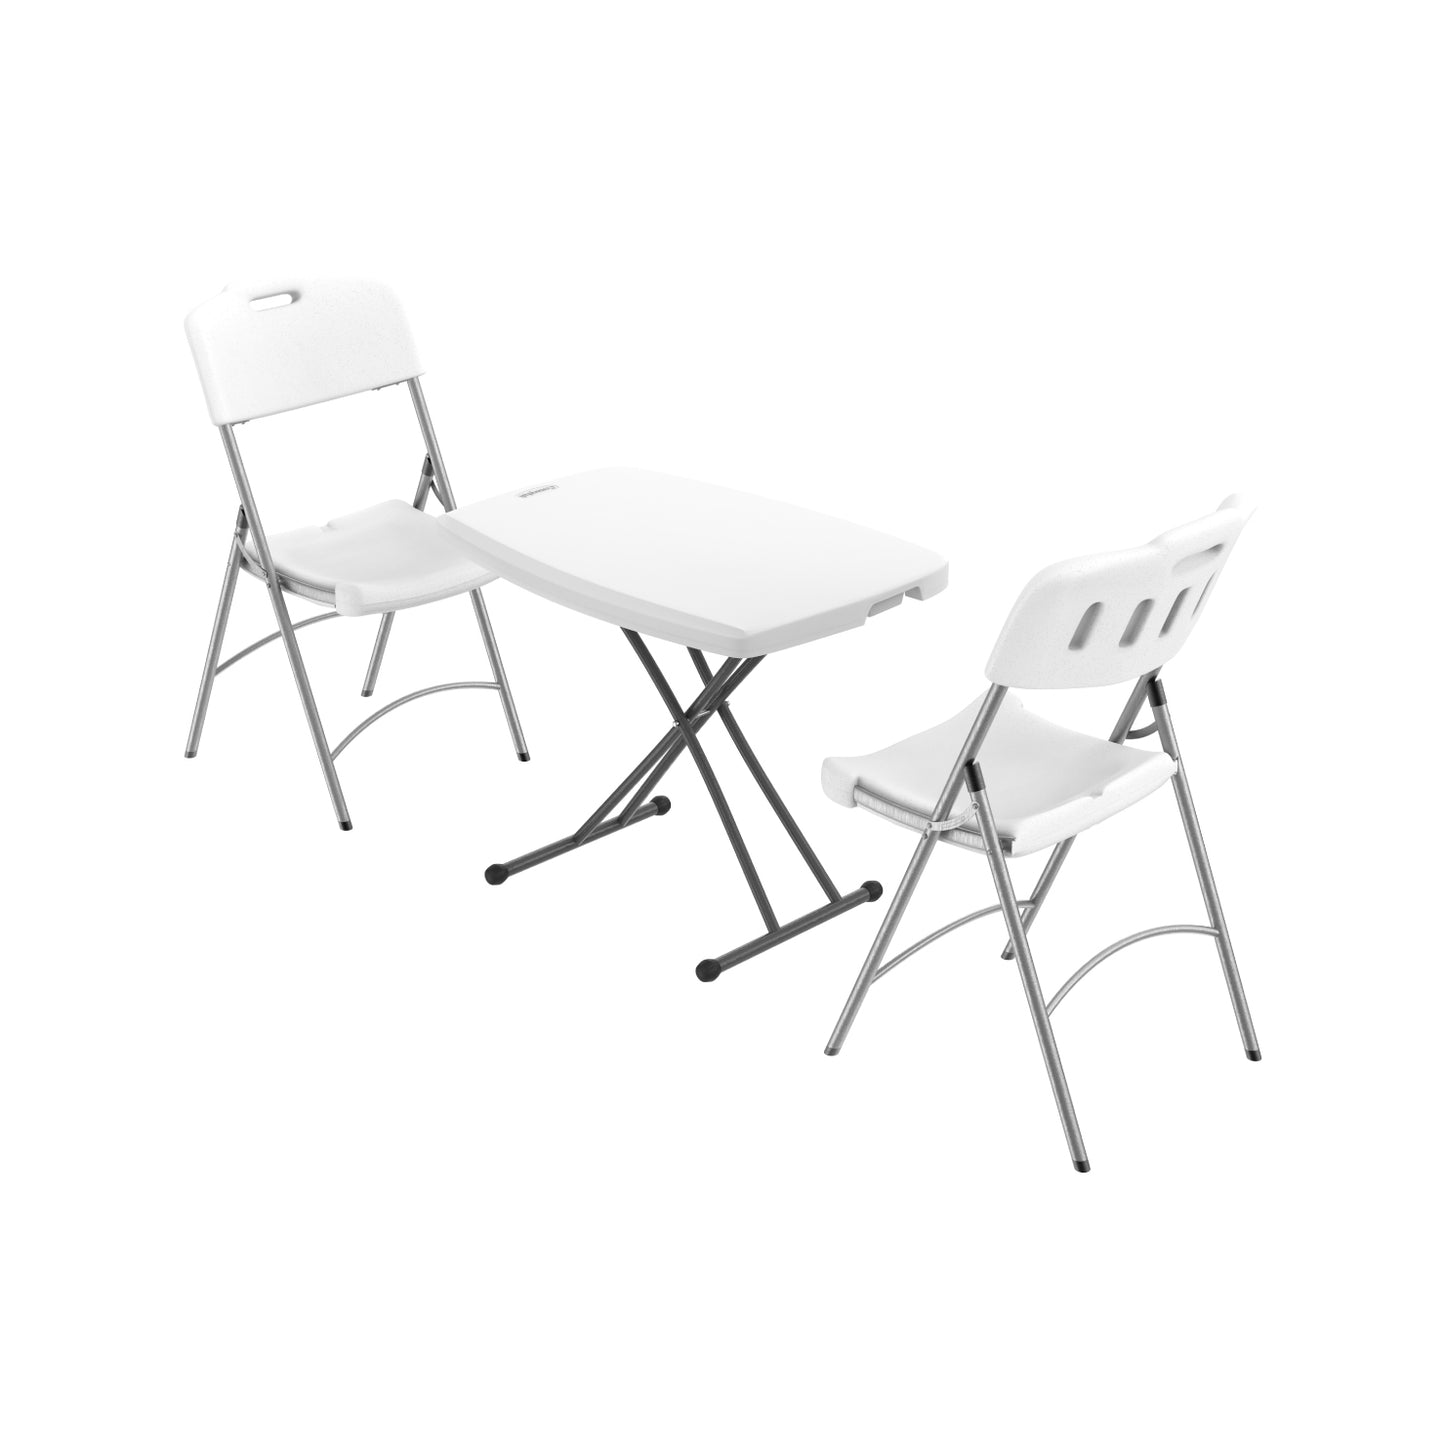 Adjustable Set of Folding Tables & Chairs with Steel Legs